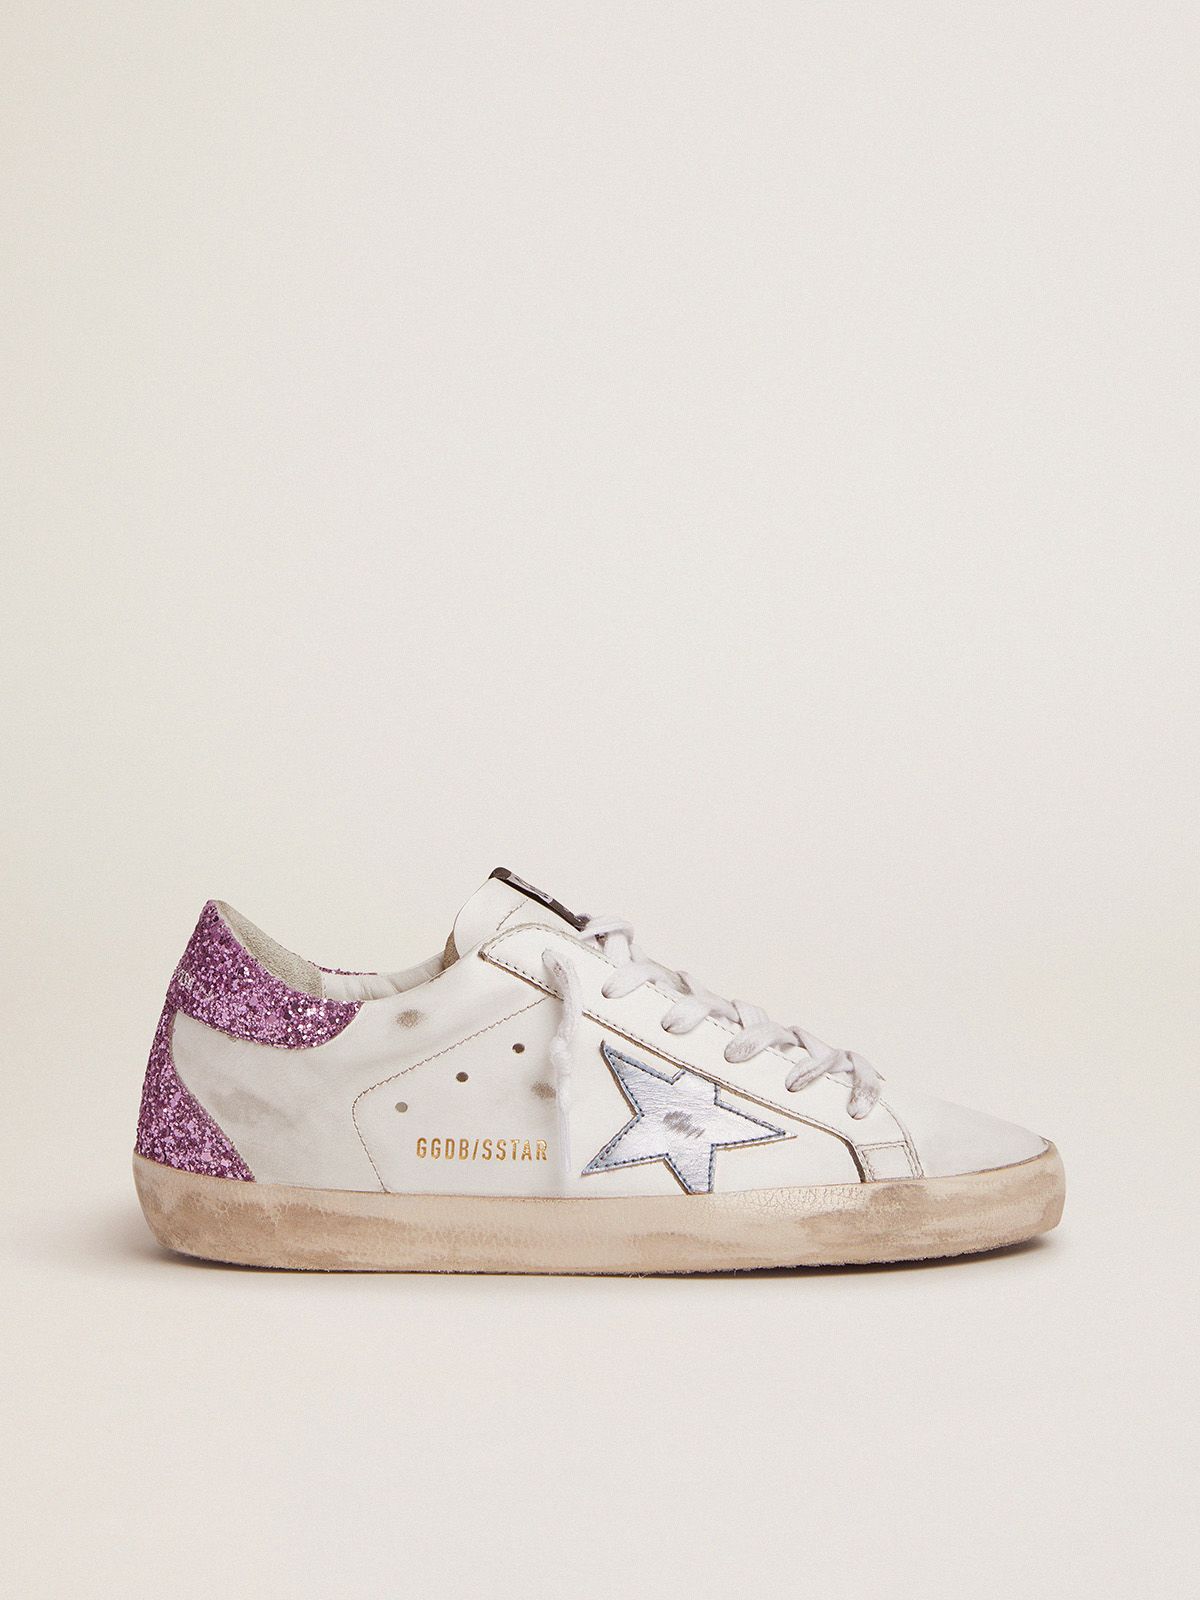 golden goose leather sneakers Super-Star glitter light-blue star and with metallic lavender tab heel